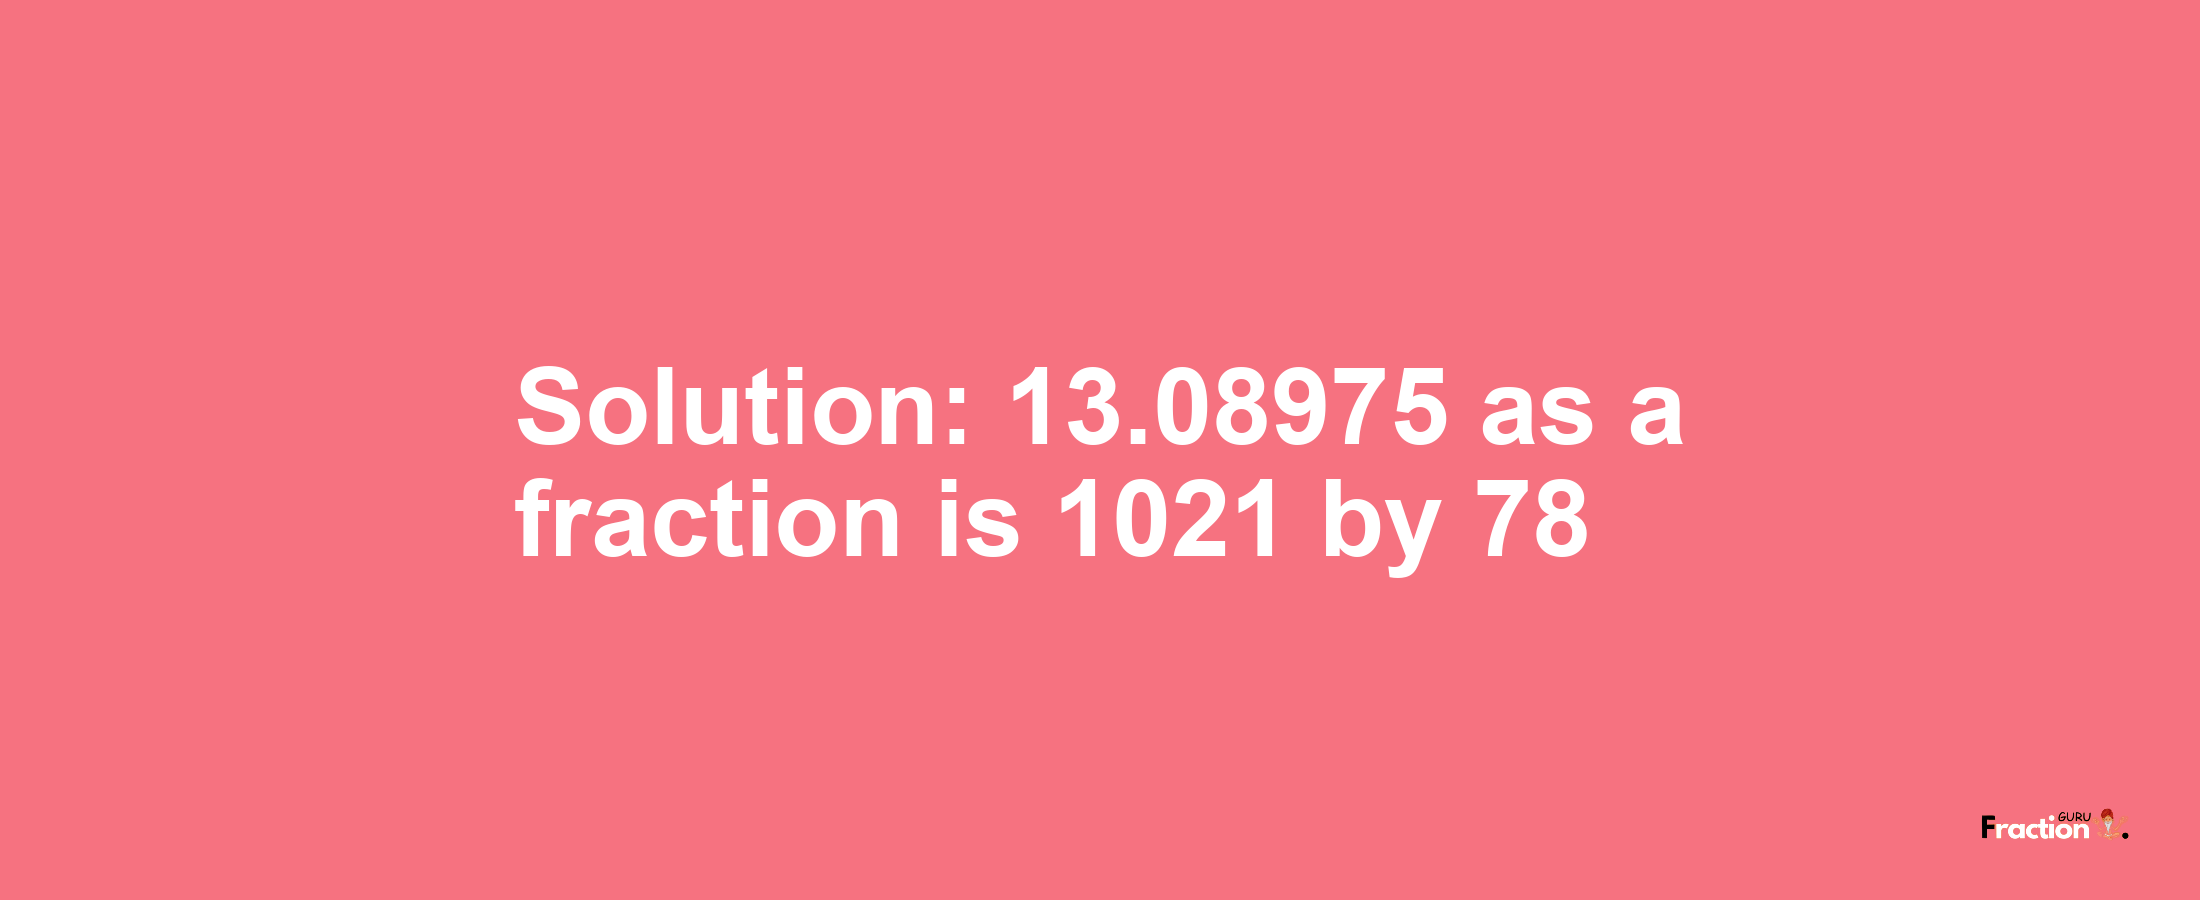 Solution:13.08975 as a fraction is 1021/78